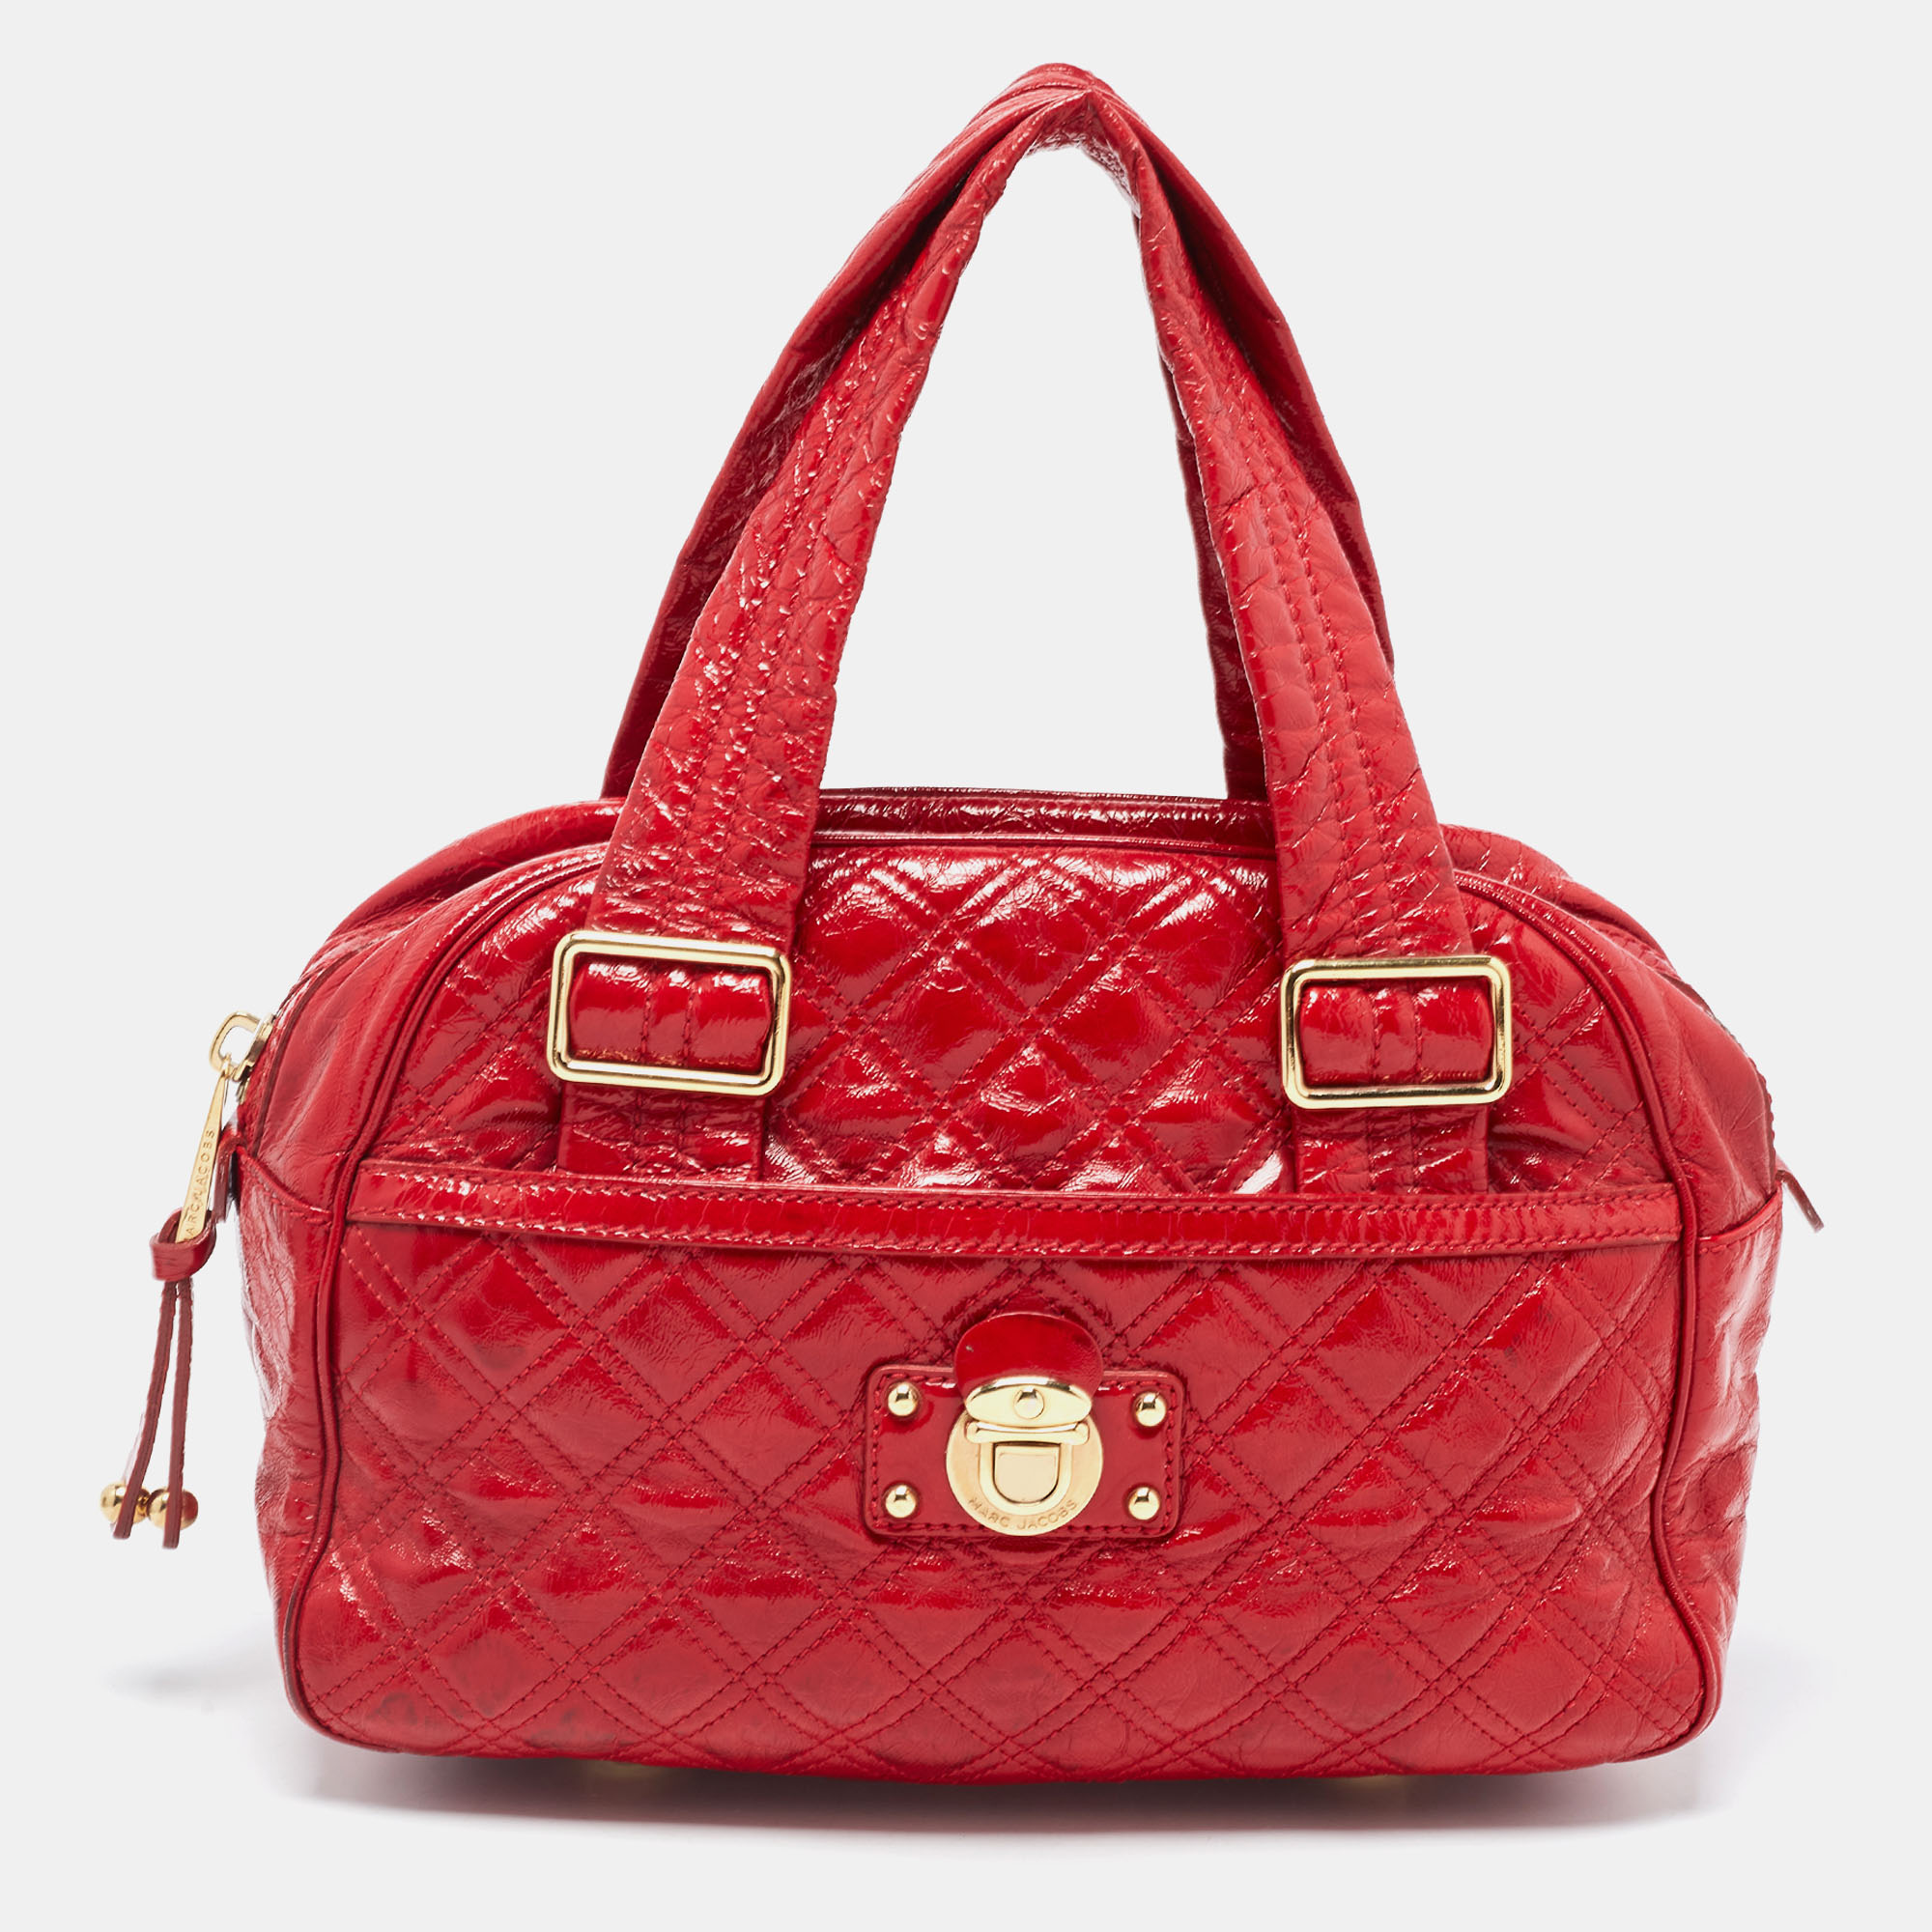 

Marc Jacobs Red Quilted Patent Leather Ursula Satchel